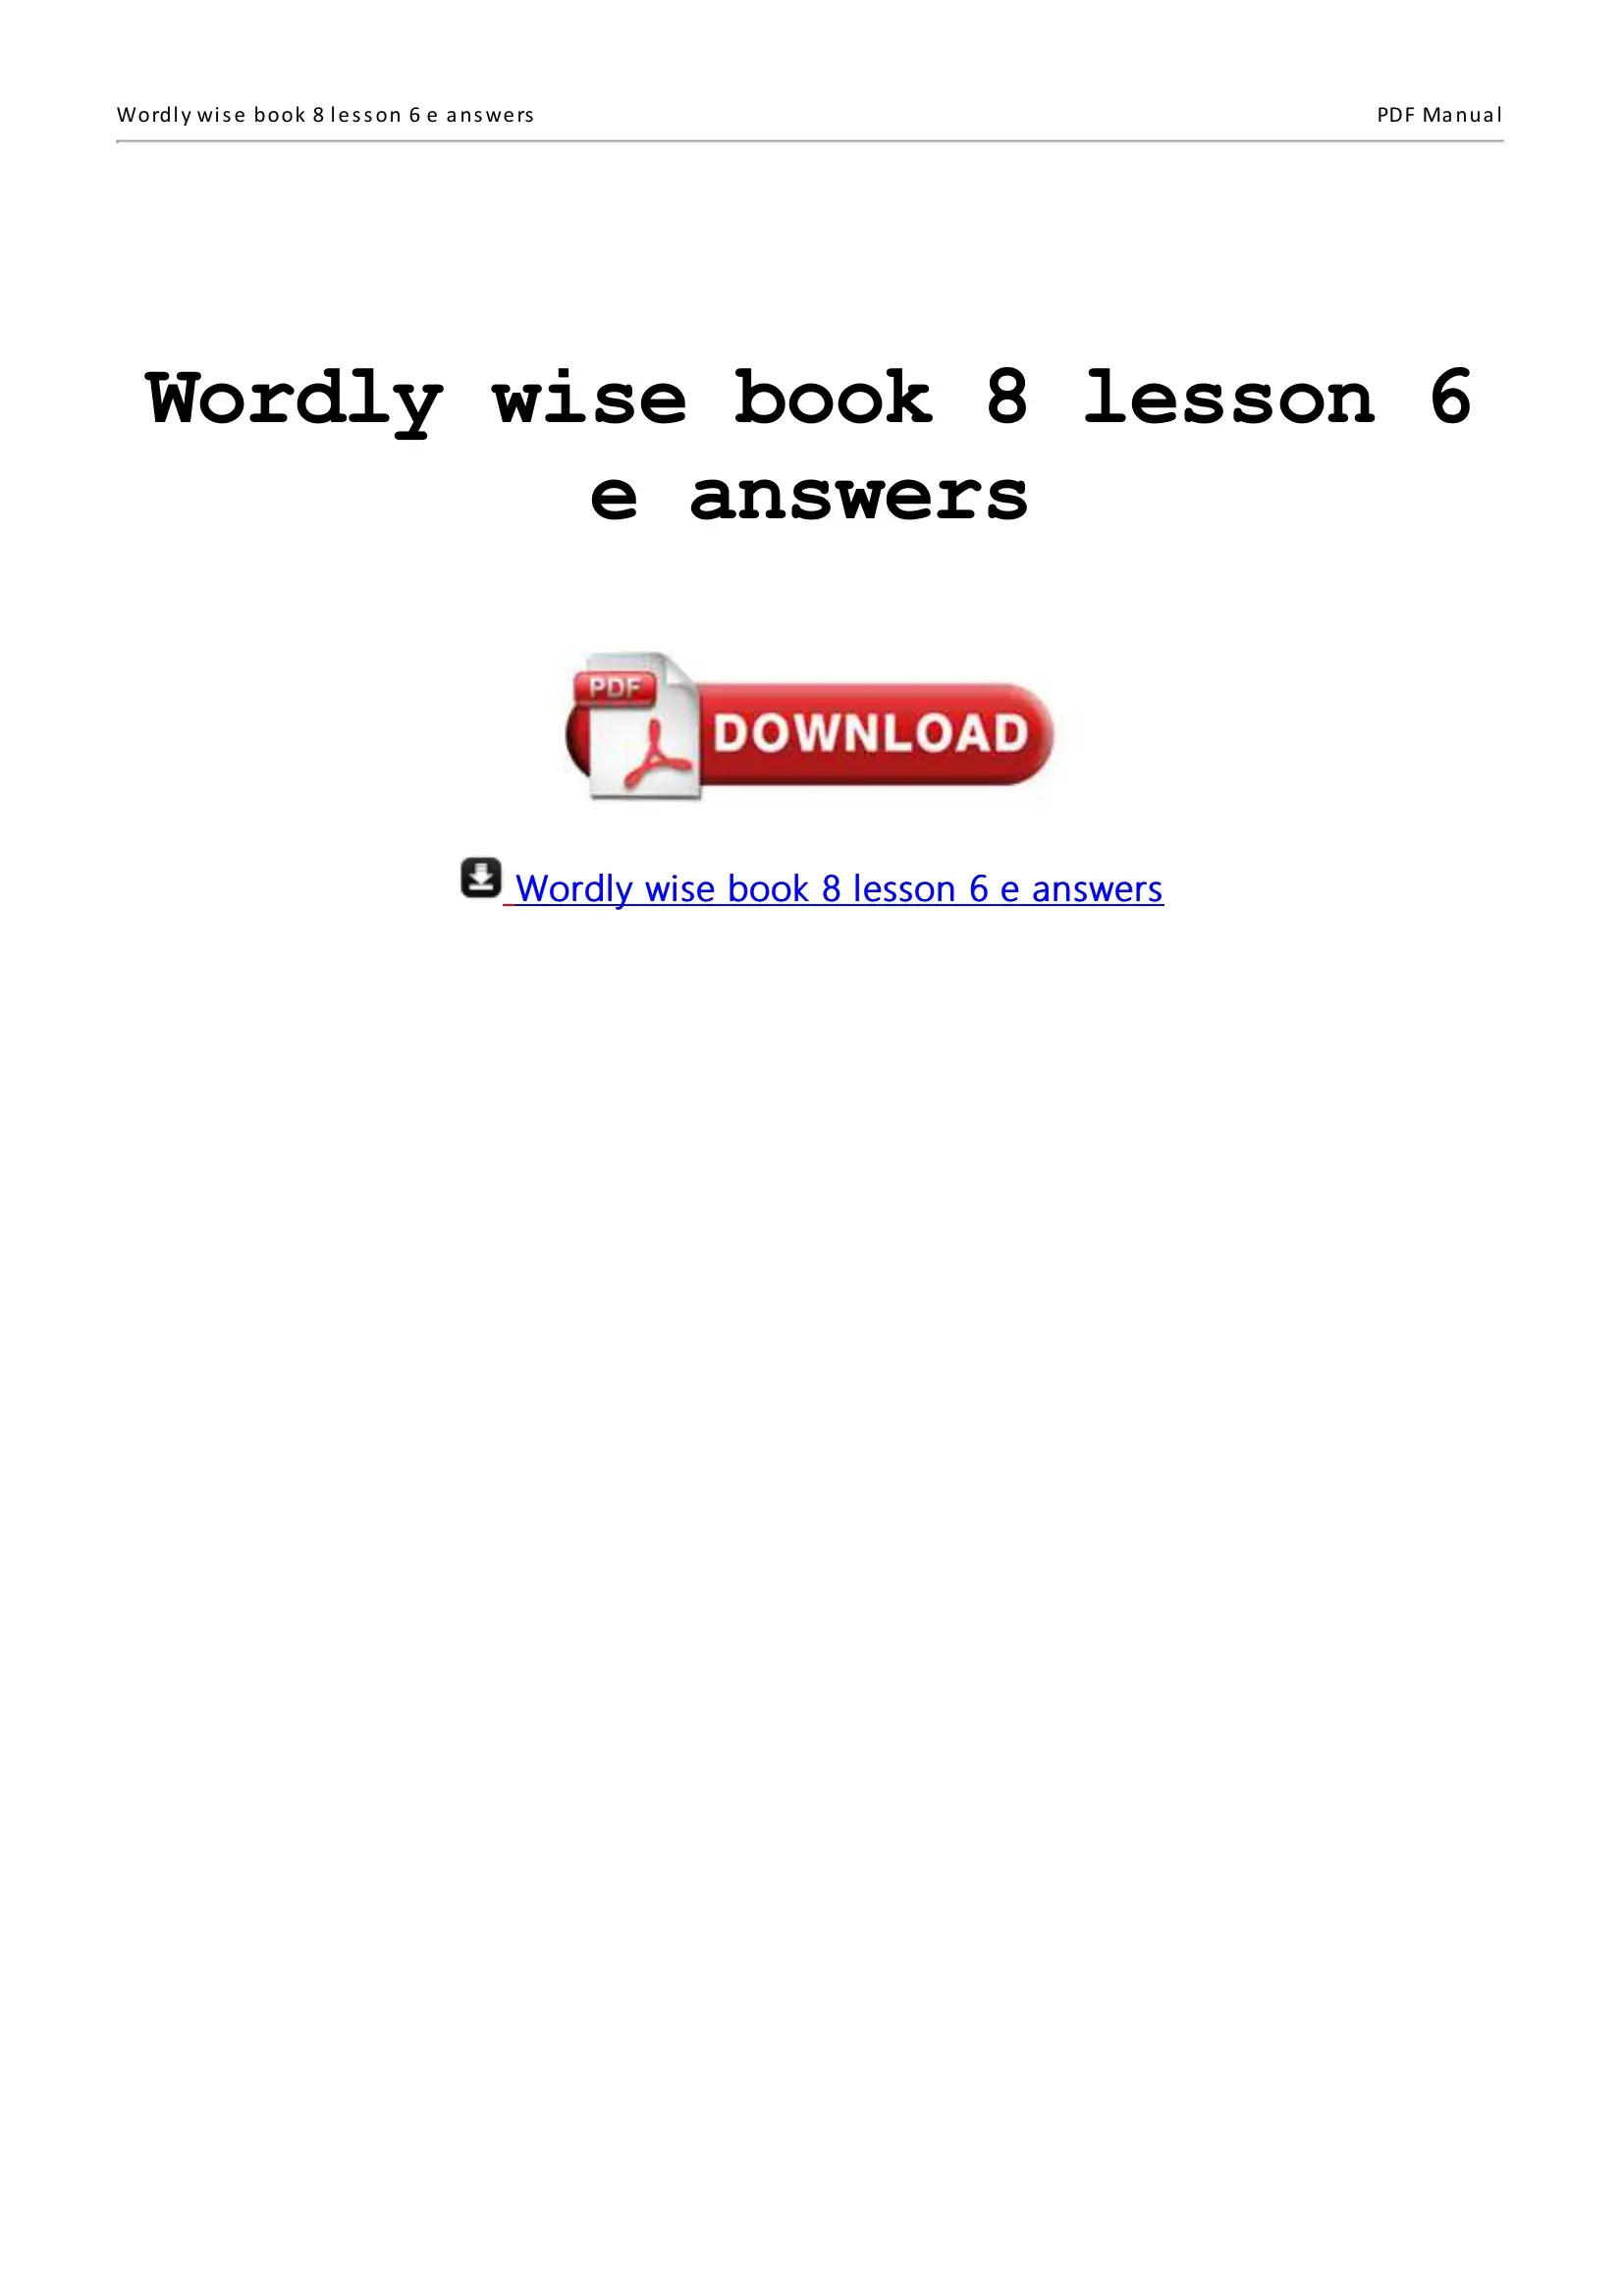 wordly-wise-book-form-fill-out-printable-pdf-forms-online